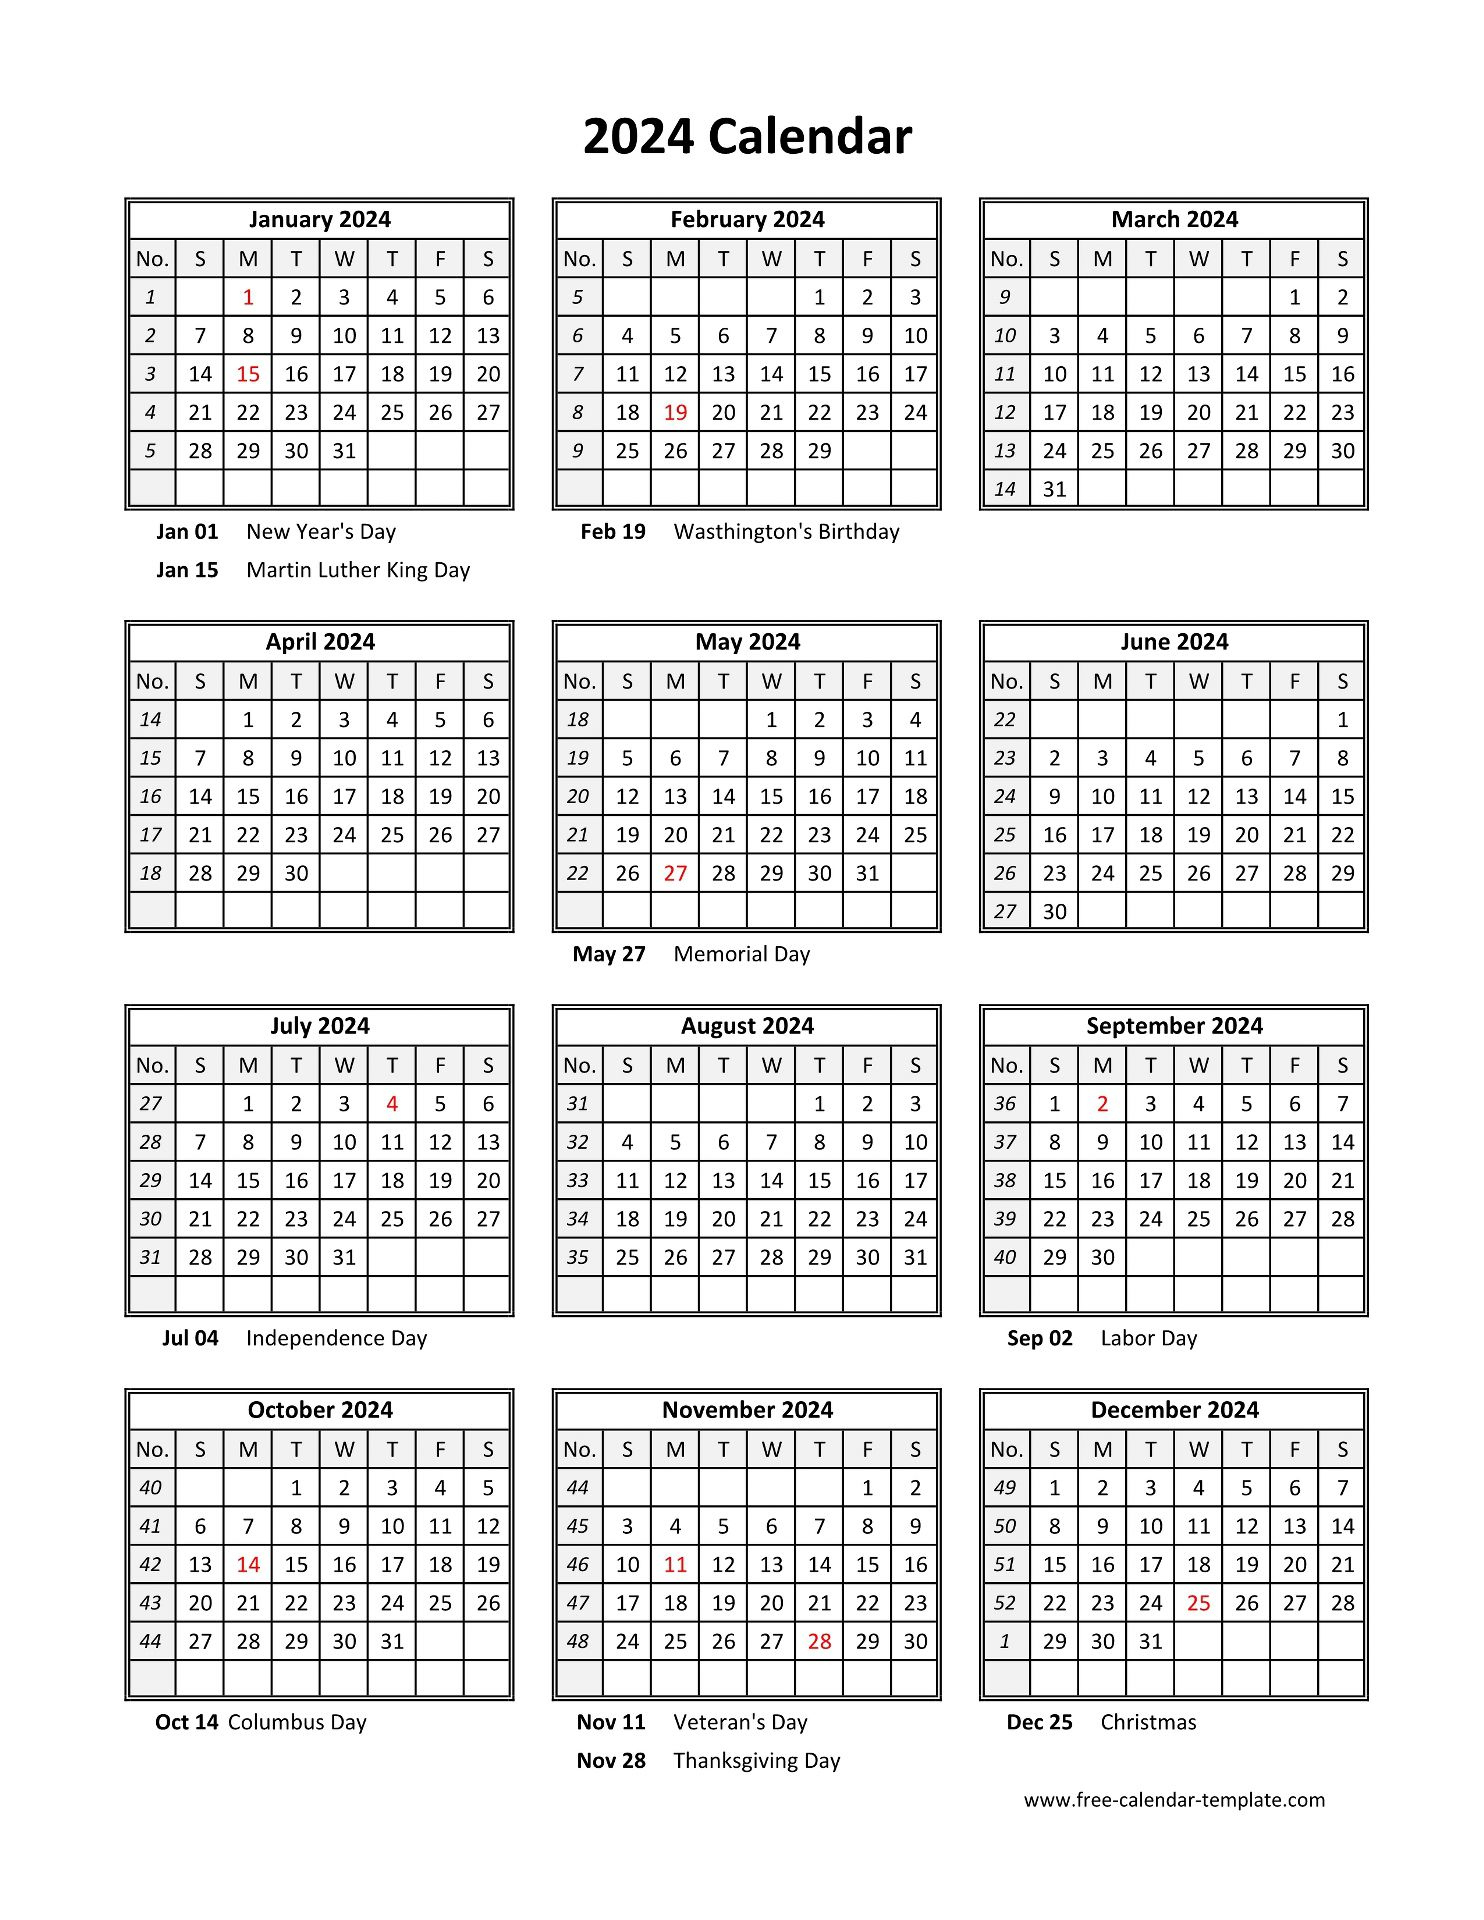 Yearly Printable Calendar 2024 With Holidays | Free-Calendar | Printable 2024 Calendars Free Printable Pdf